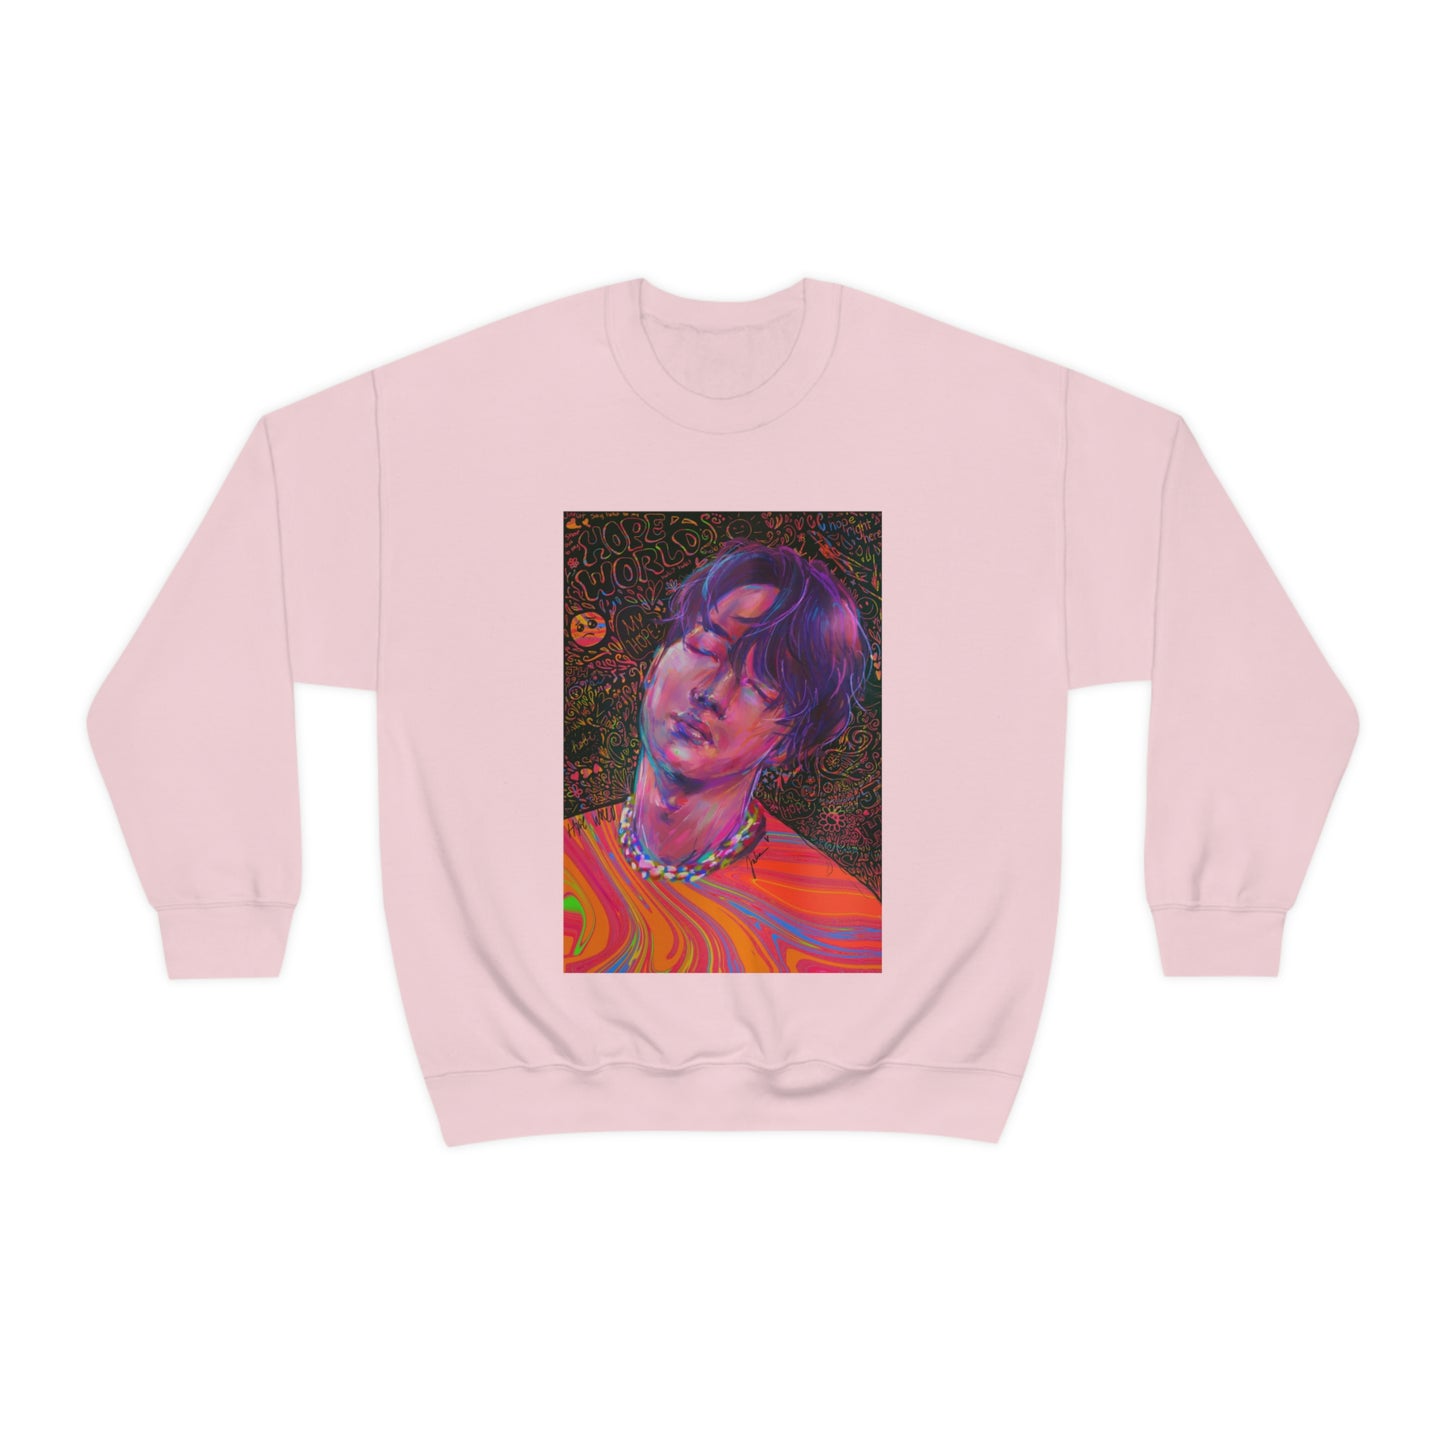 Colors of Hope Sweatshirt *Limited Edition*